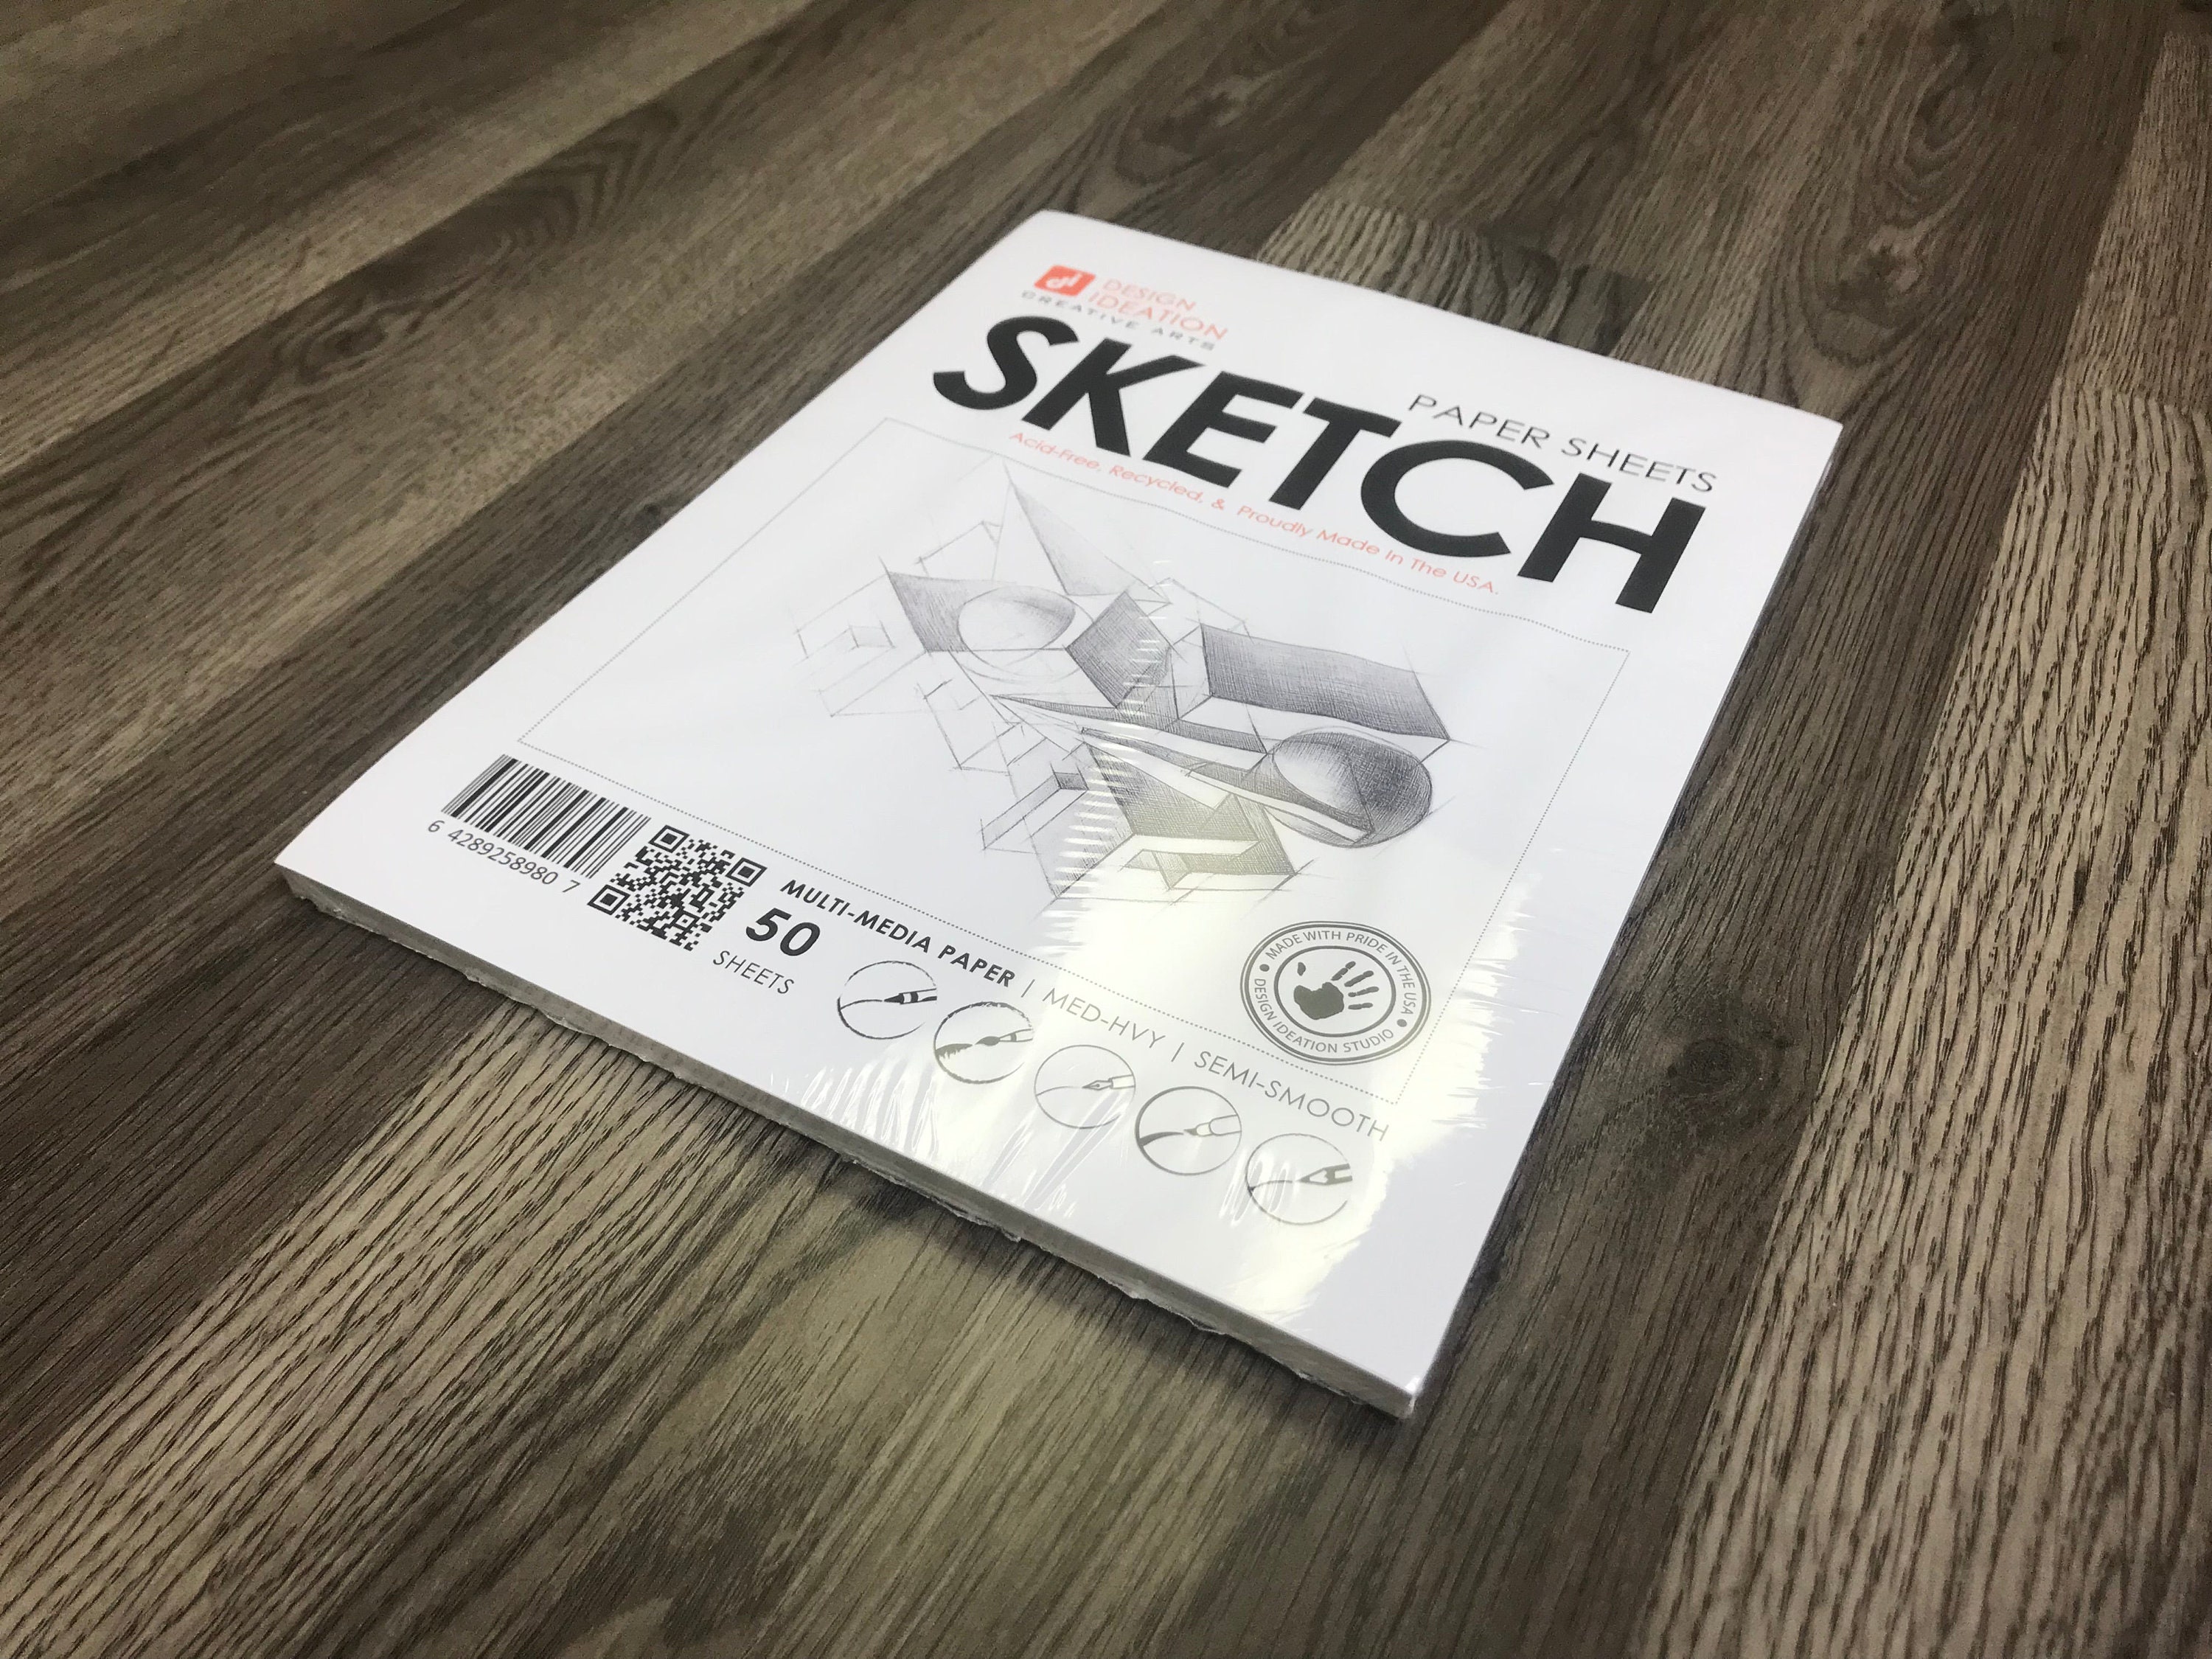  Design Ideation Lay Flat Multi Media Sketchbook. Removable  Sheet Sketch Book for Pencil, Ink, Marker, Charcoal and Watercolor Paints.  Great for Art, Design and Education. 8.5 x 11 : Arts, Crafts